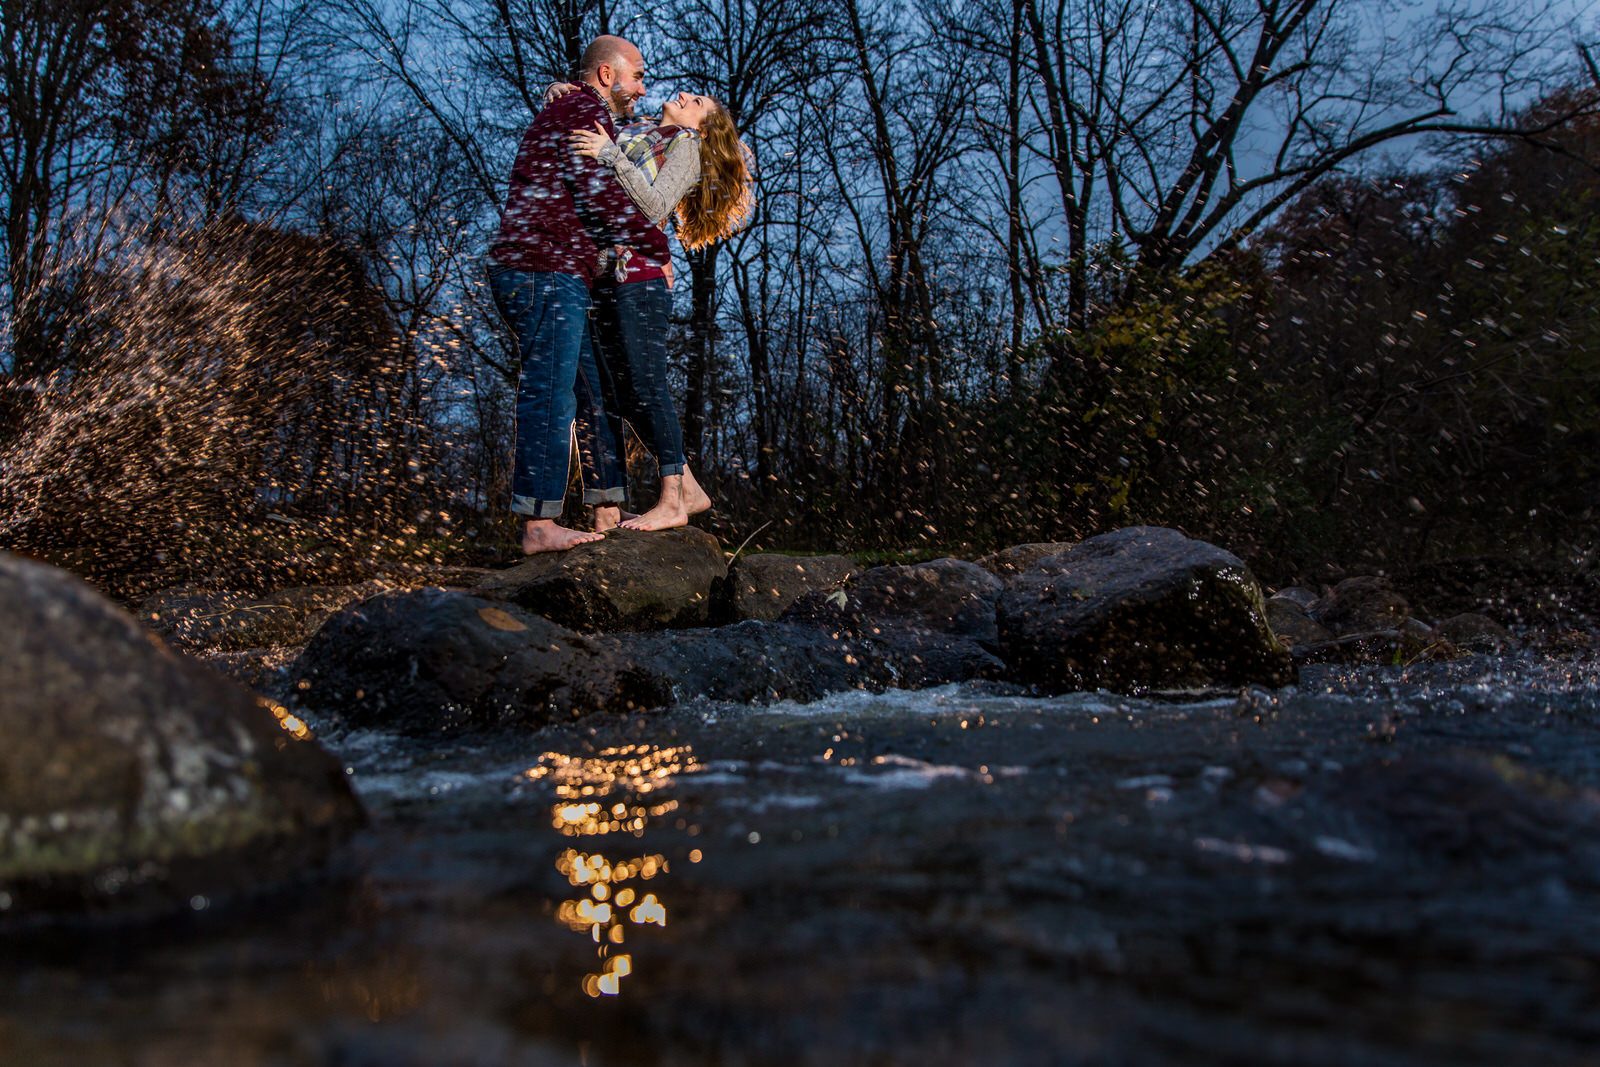 Wildwood Park Engagement Session couple playing in the water